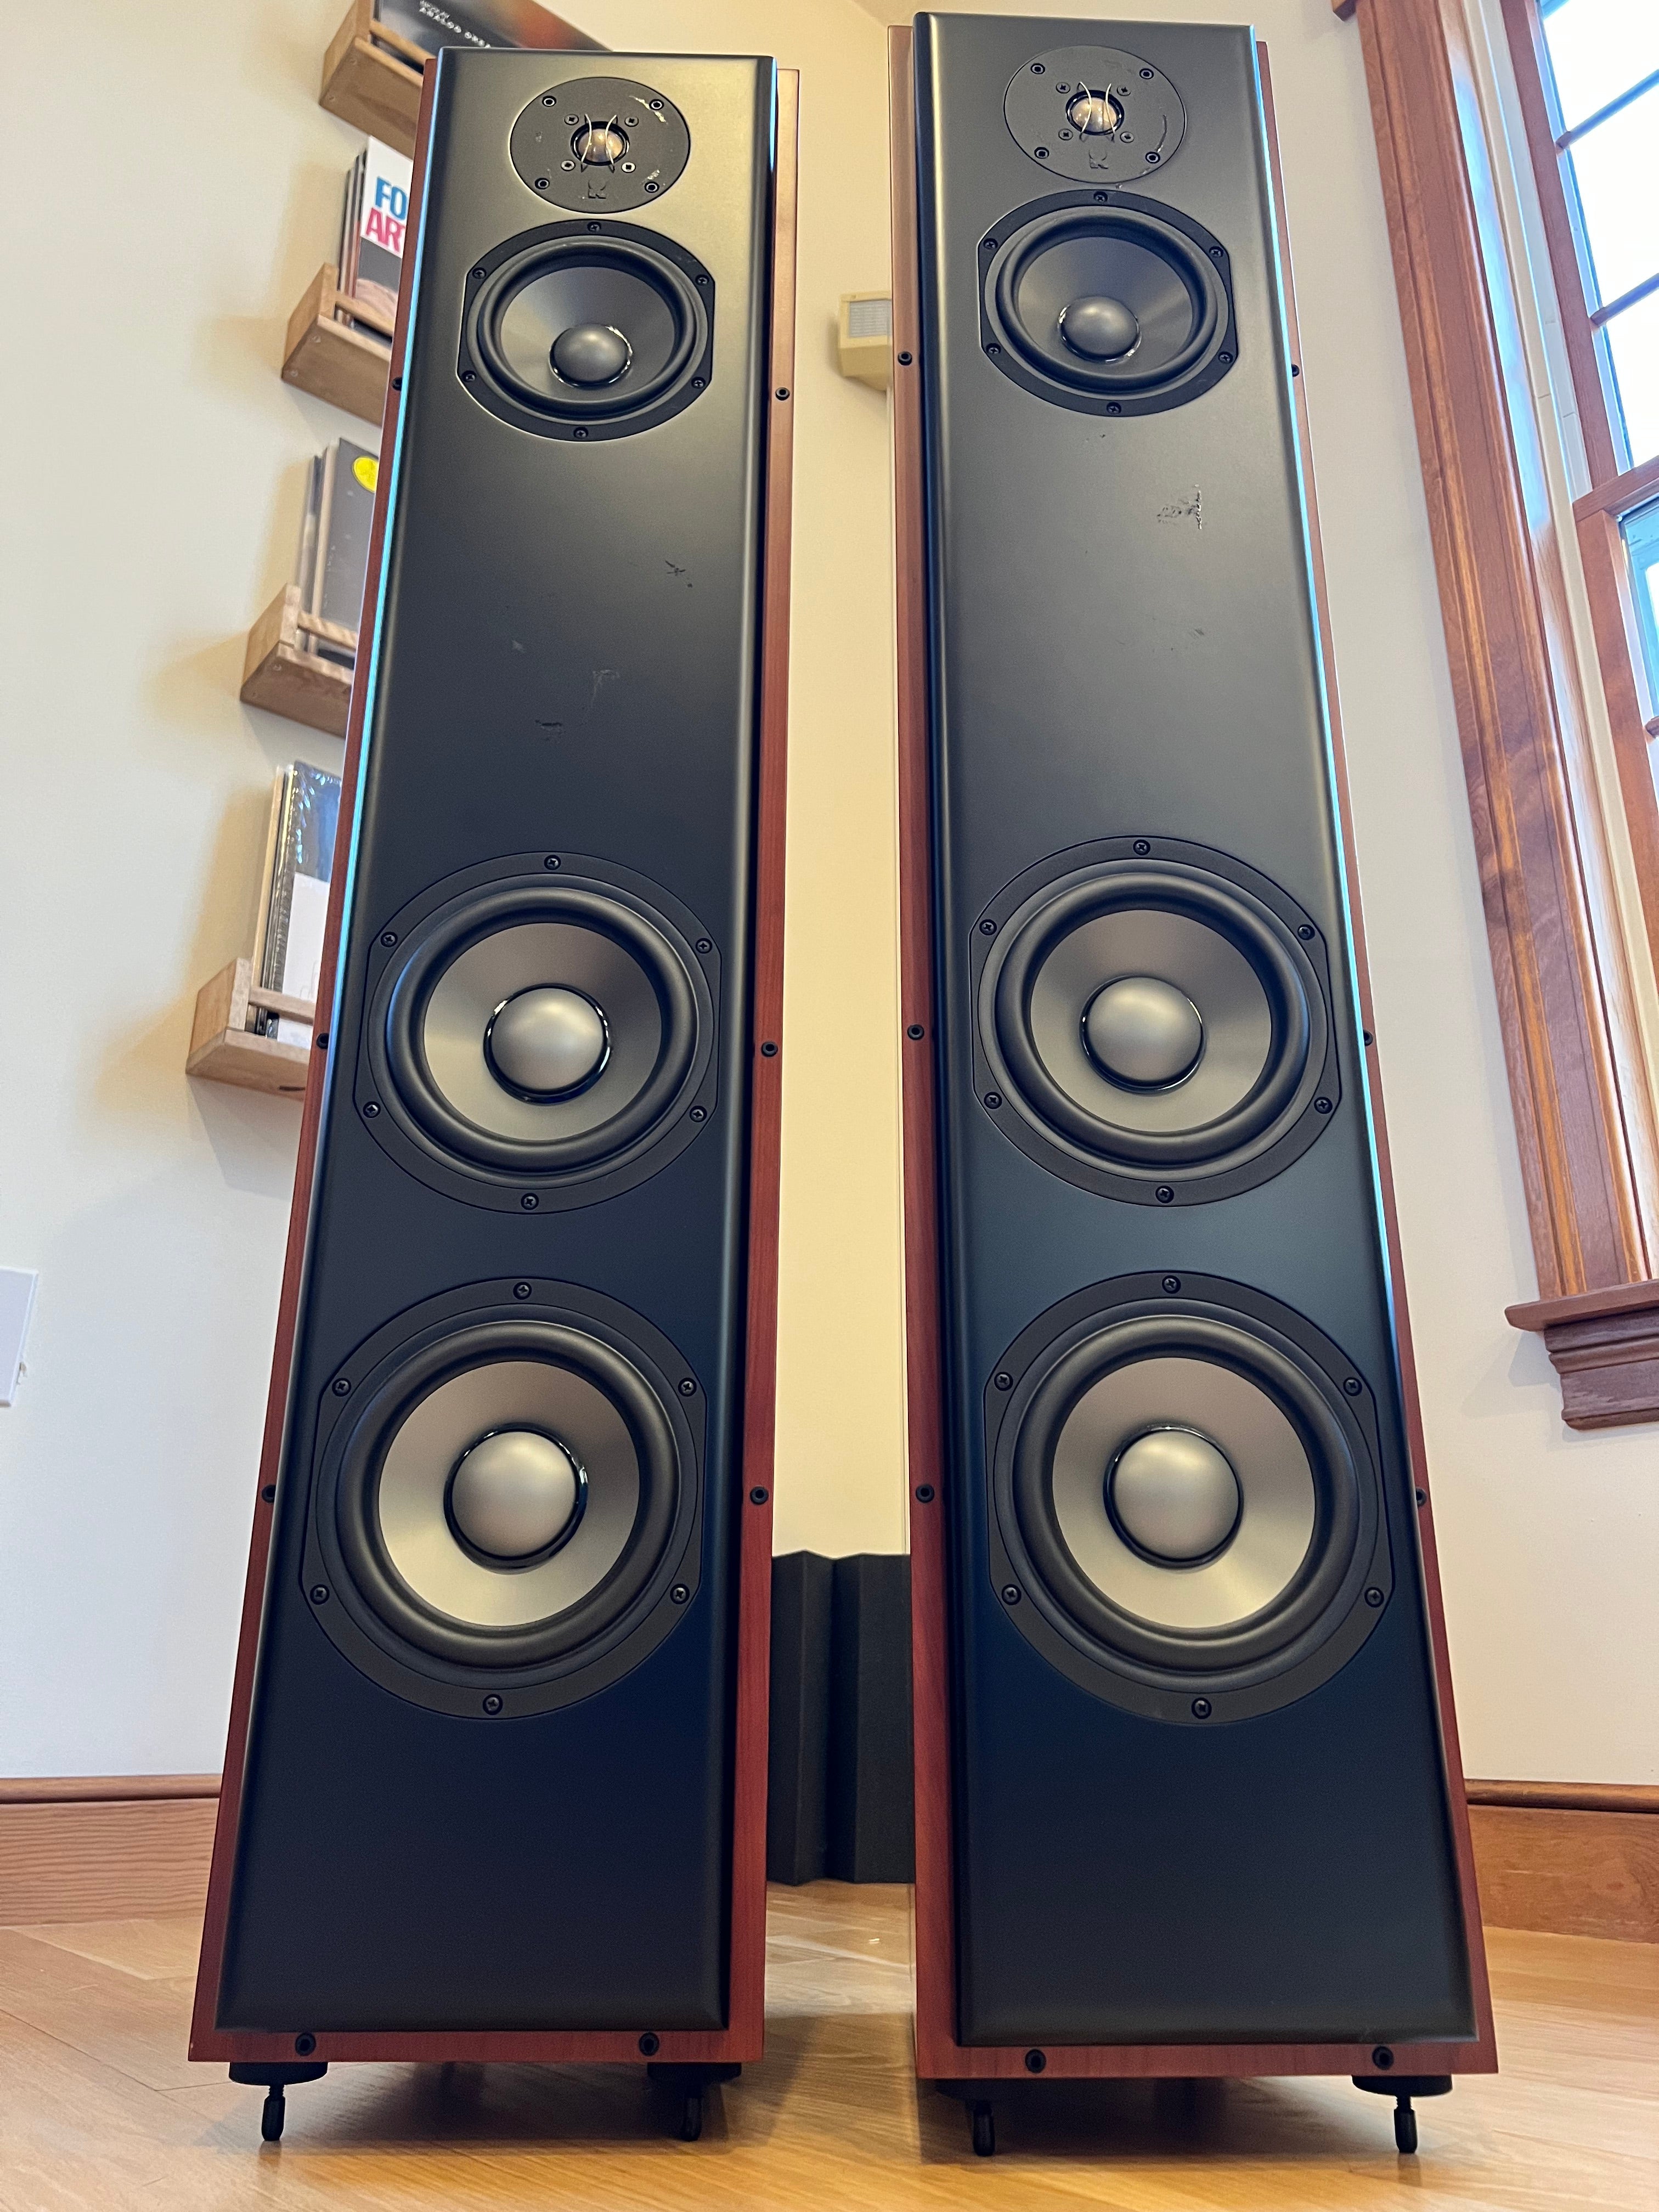 Revel Performa F32 Tower Speakers, Cherry Wood Finish - SOLD